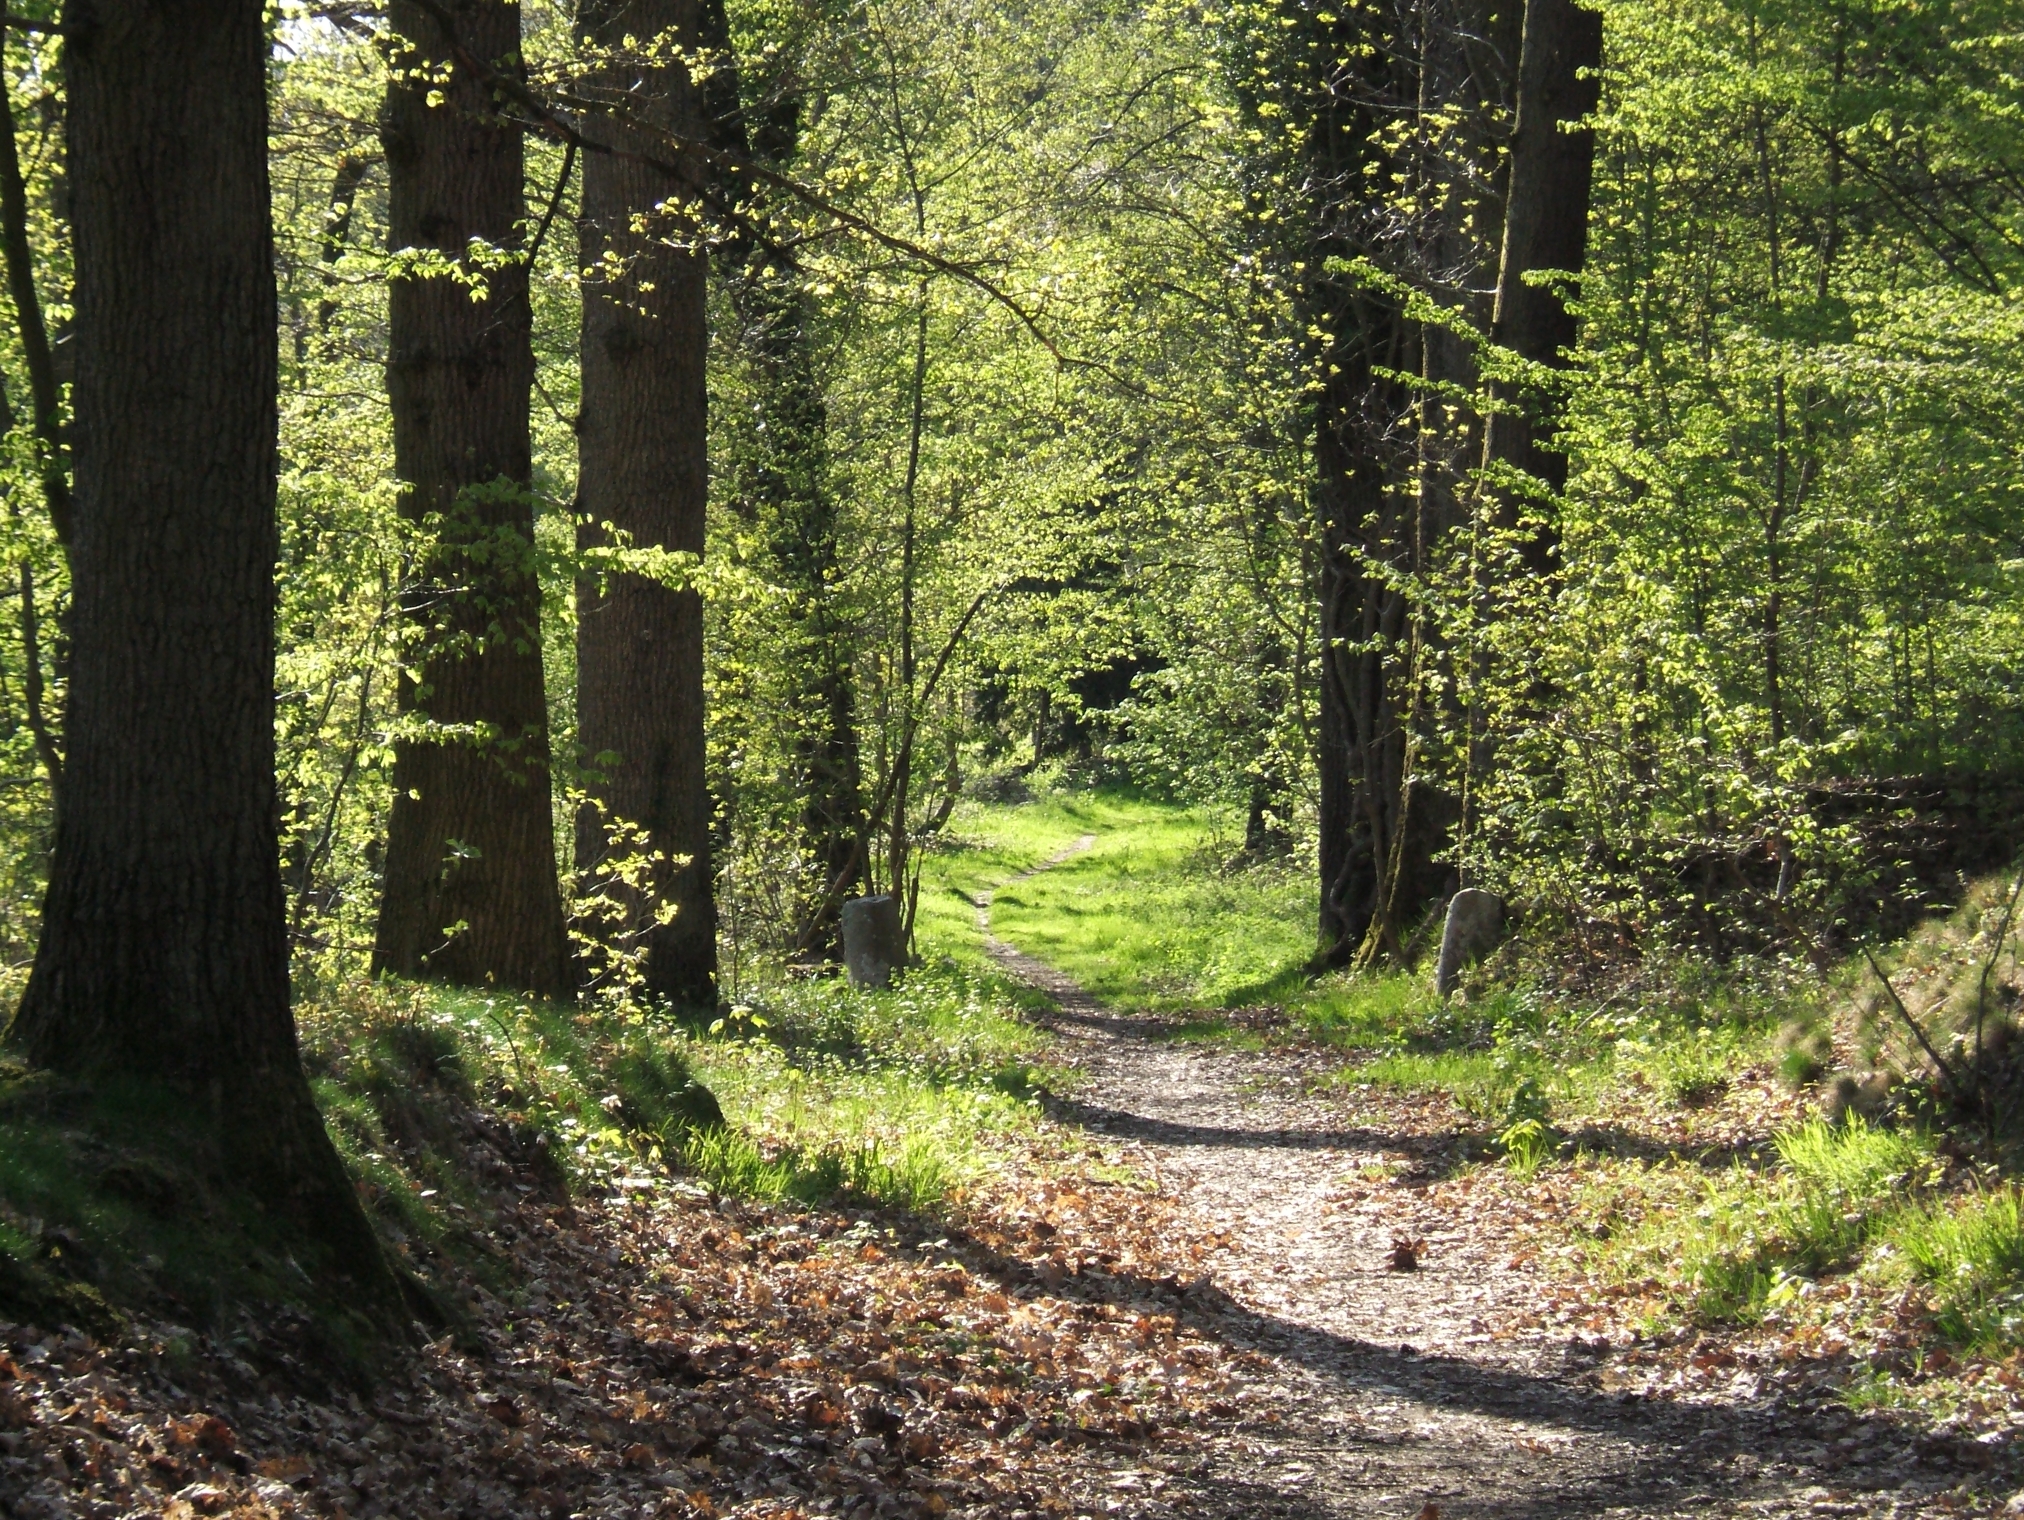 File:Forest path in Yvelines - France.jpg - Wikimedia Commons